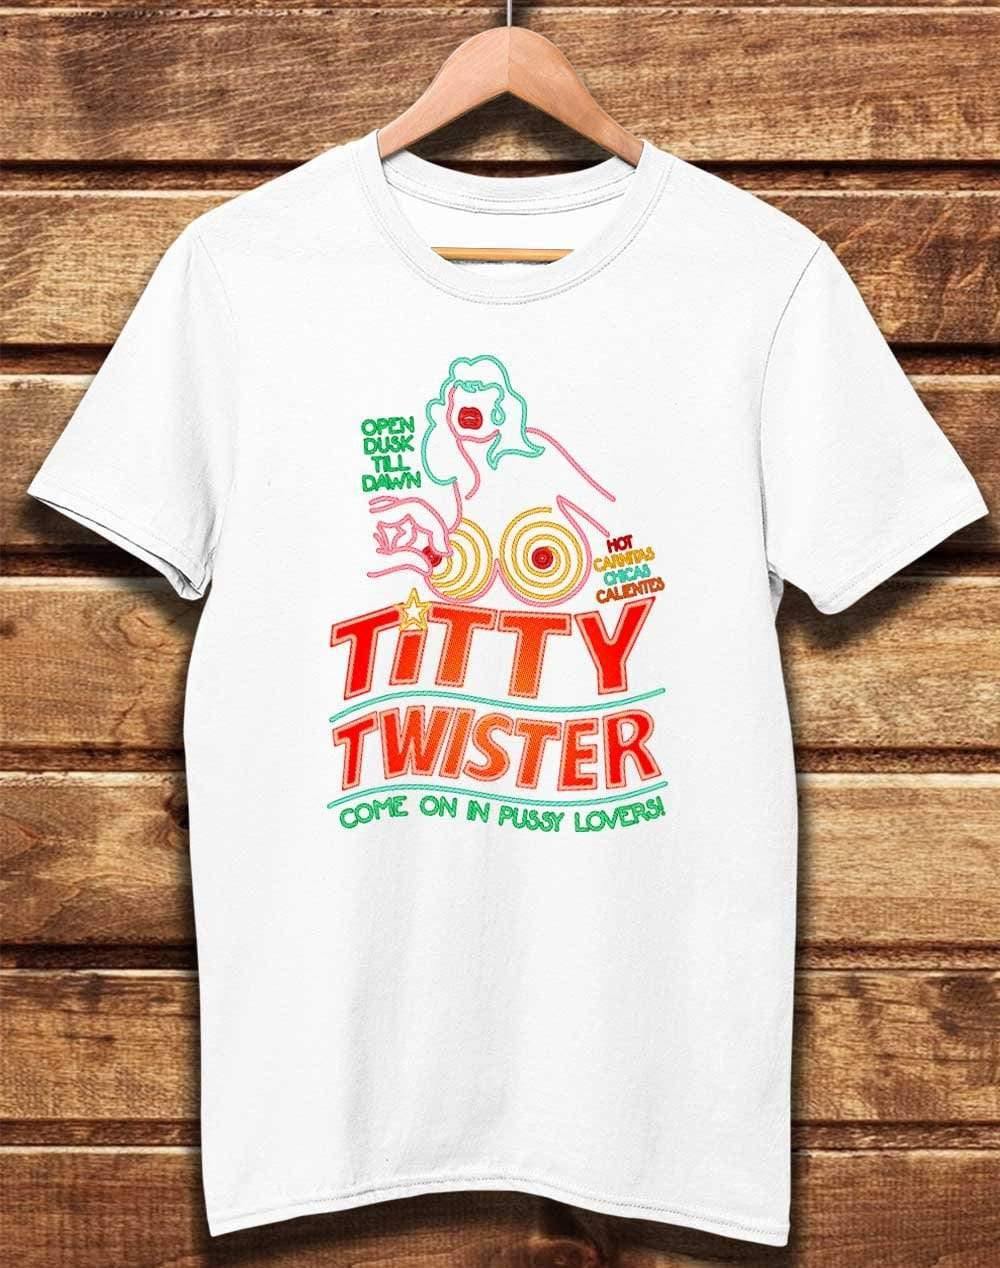 DELUXE Titty Twister Organic Cotton T-Shirt XS / White  - Off World Tees